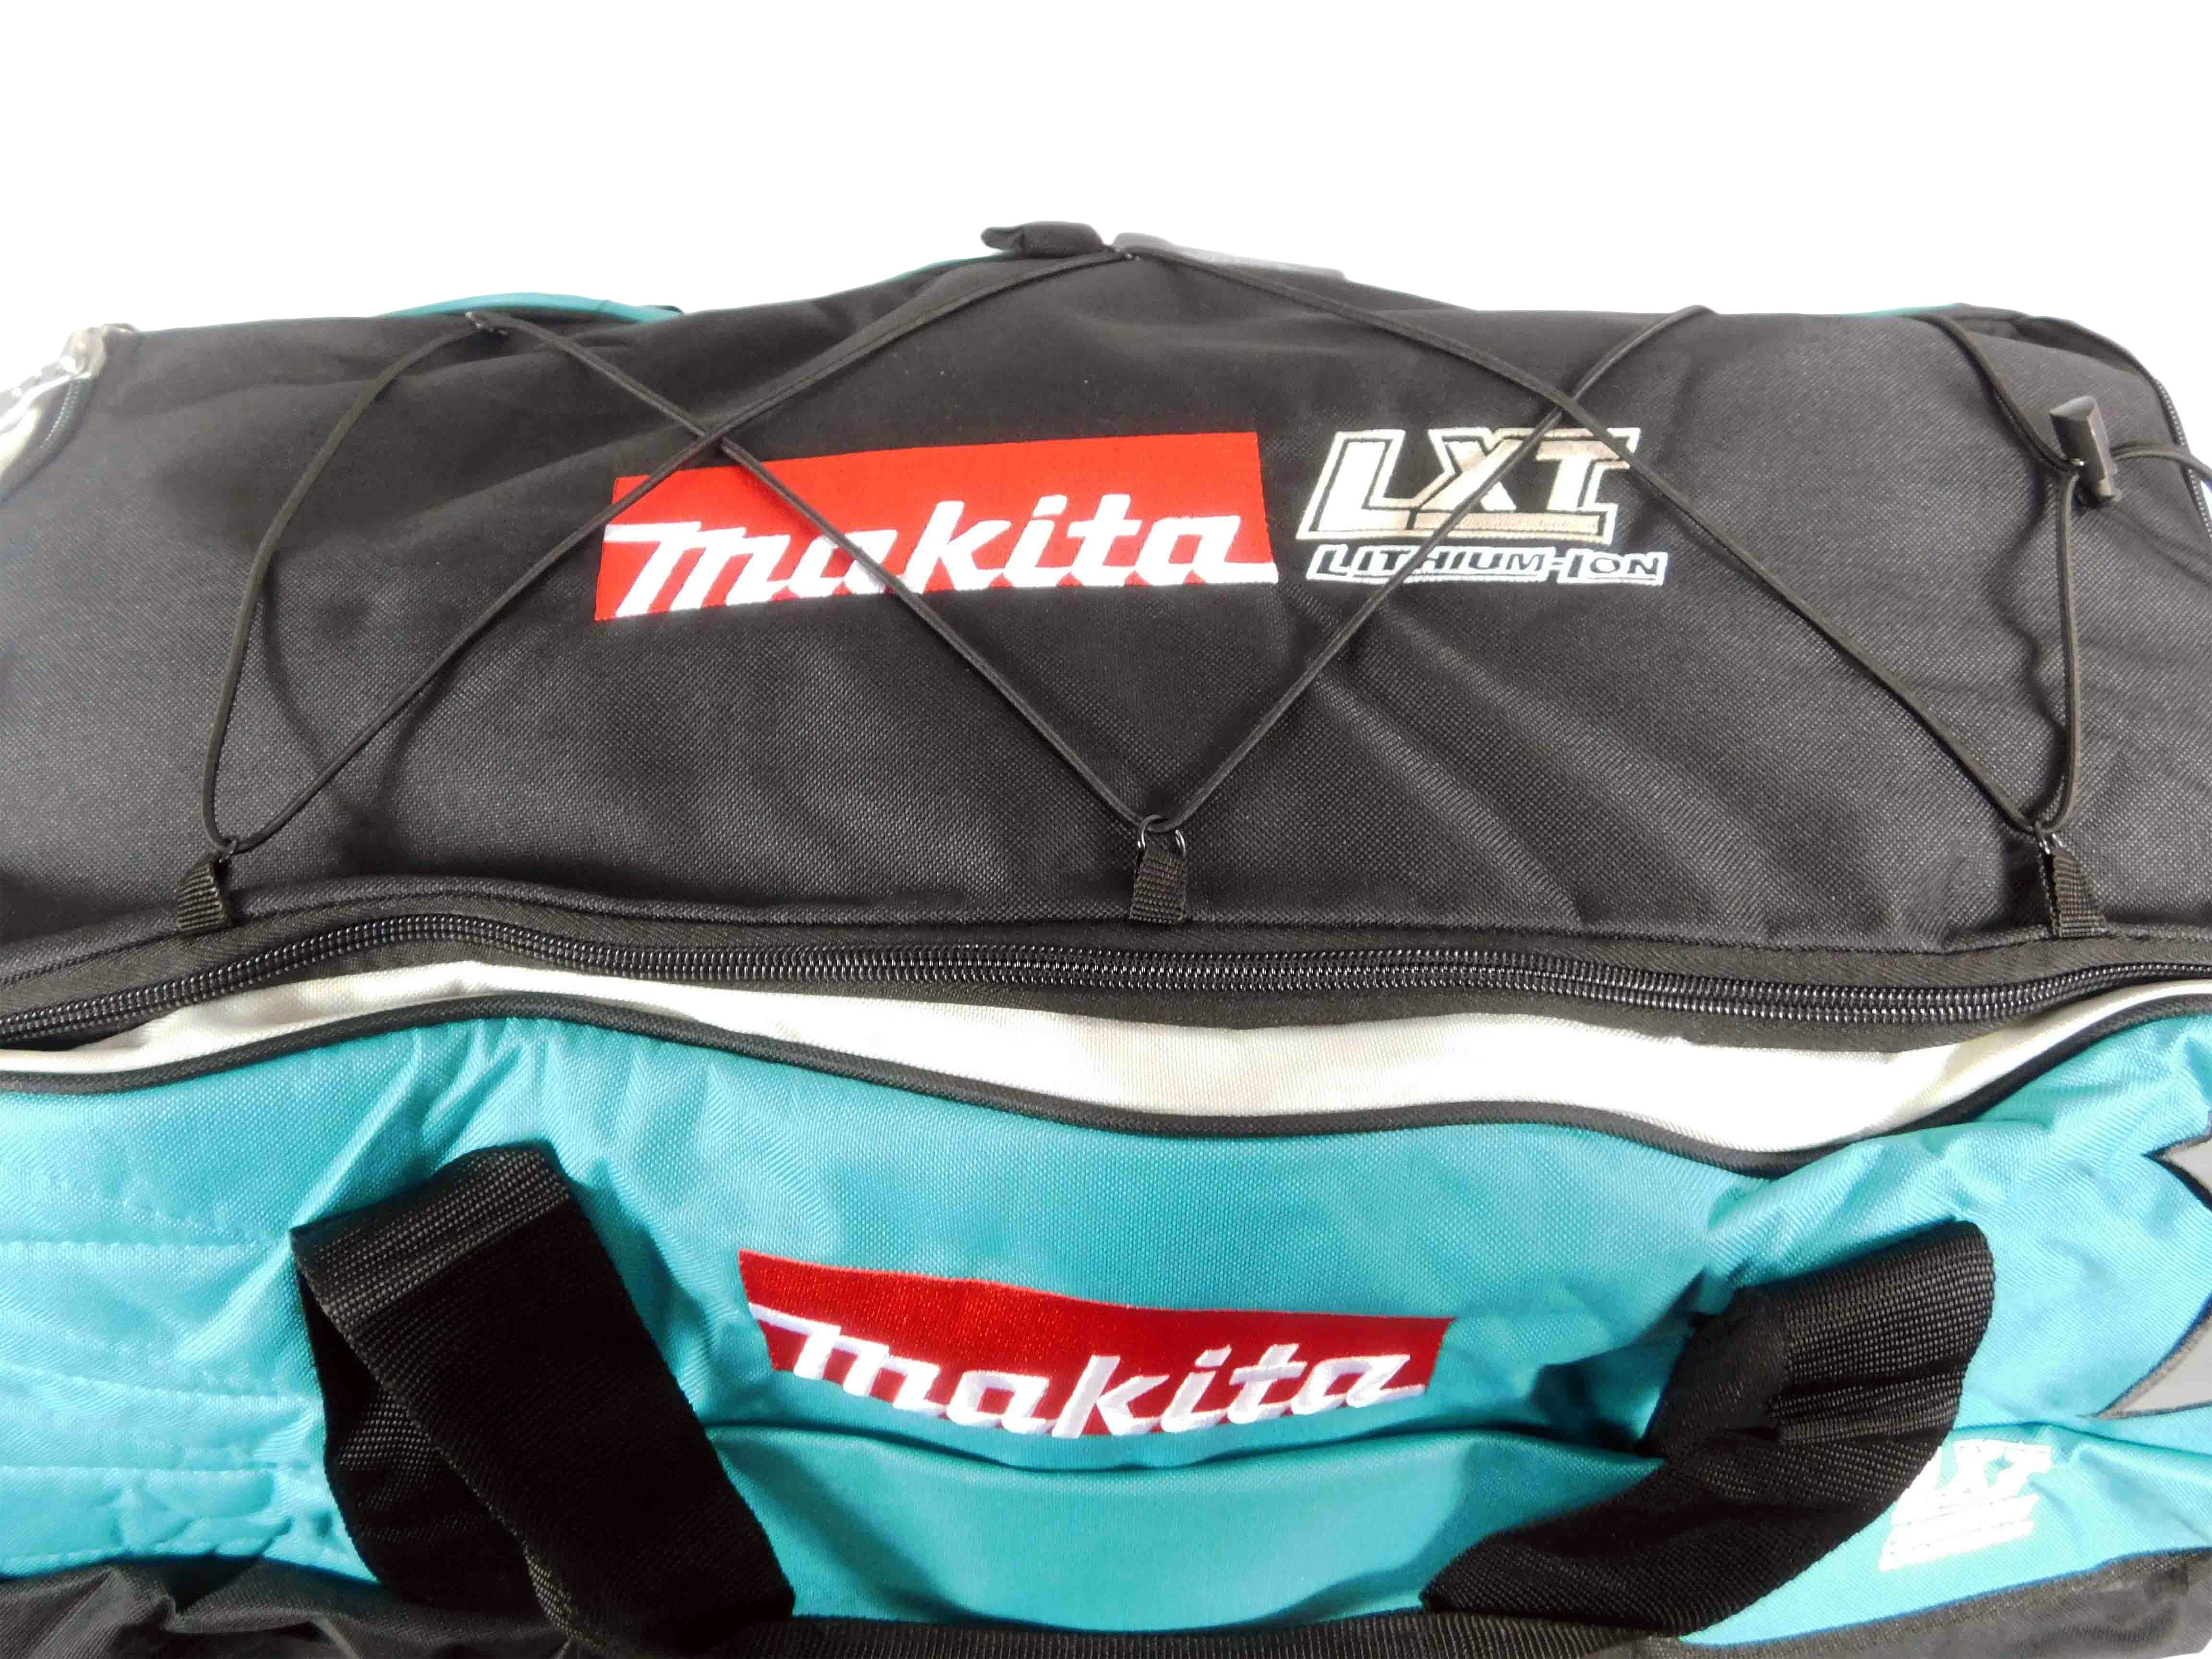 Makita 831269-3 Large LXT Tool Bag With Wheels for Cordless 18V Tools